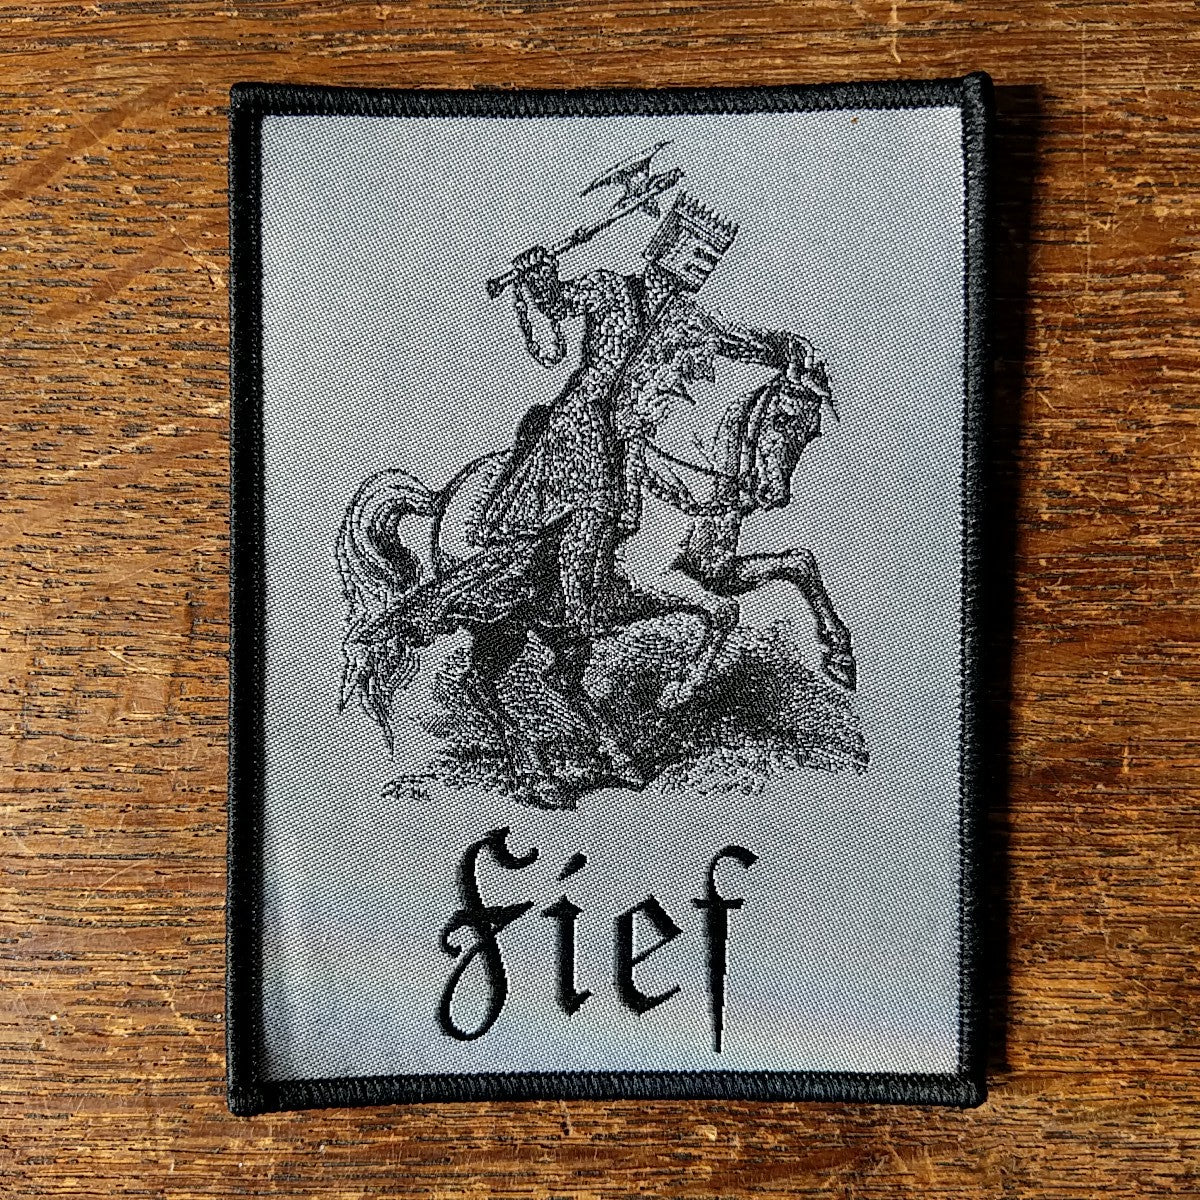 [SOLD OUT] FIEF "Knight" Patch